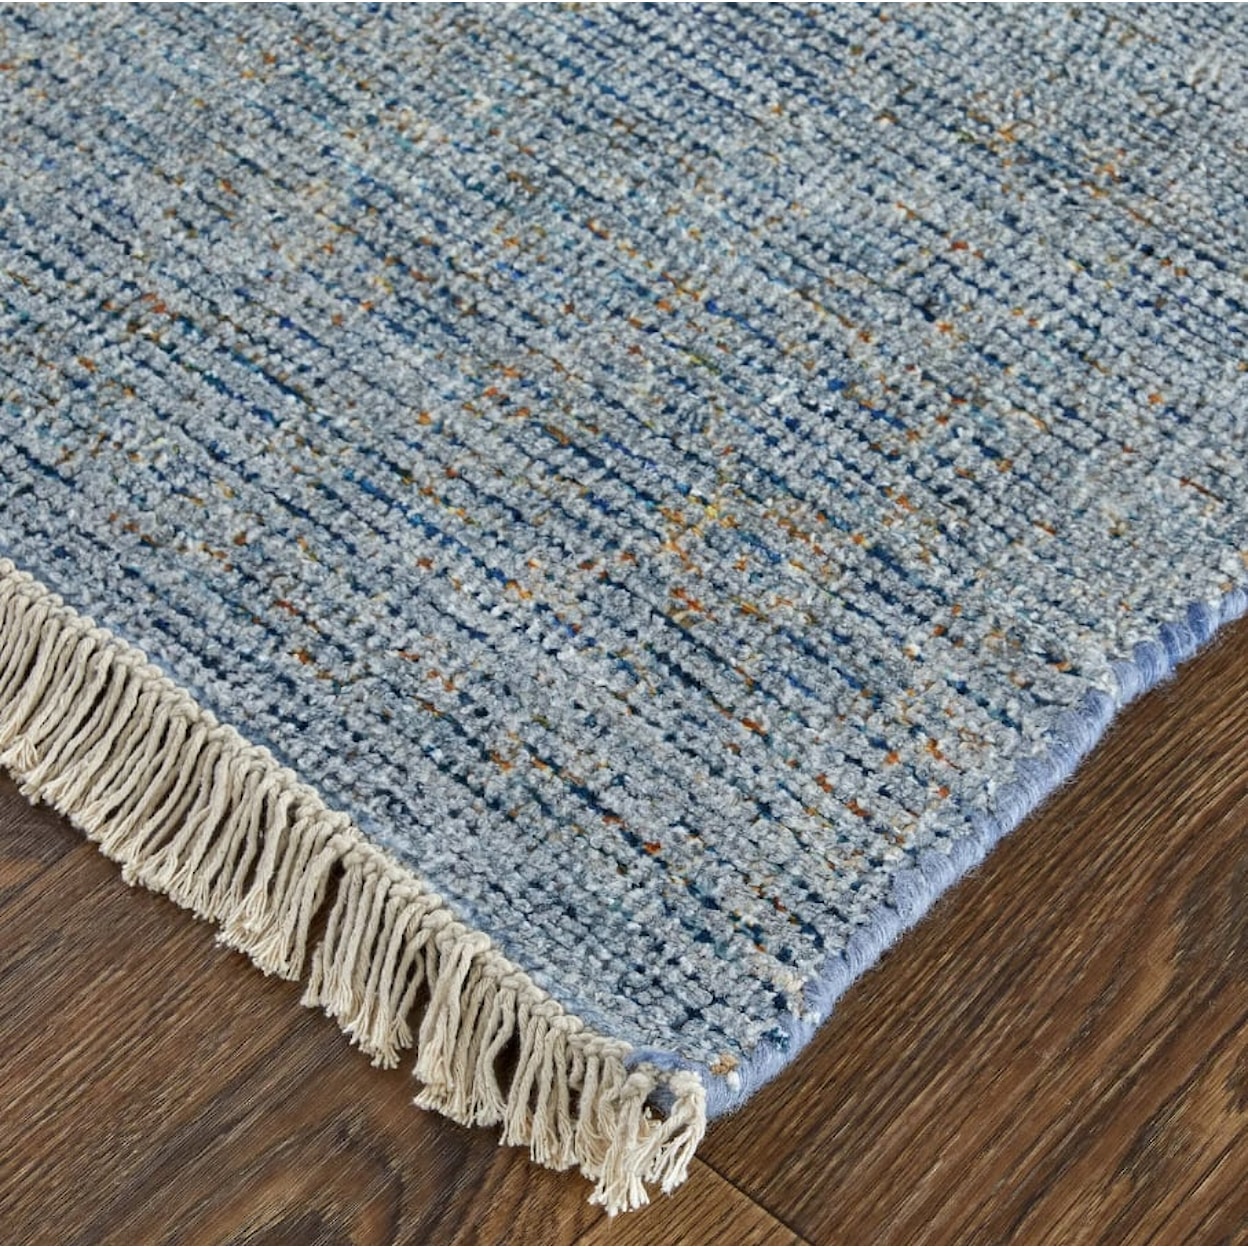 Feizy Rugs Caldwell Caldwell 8803F in Blue- Multicolor